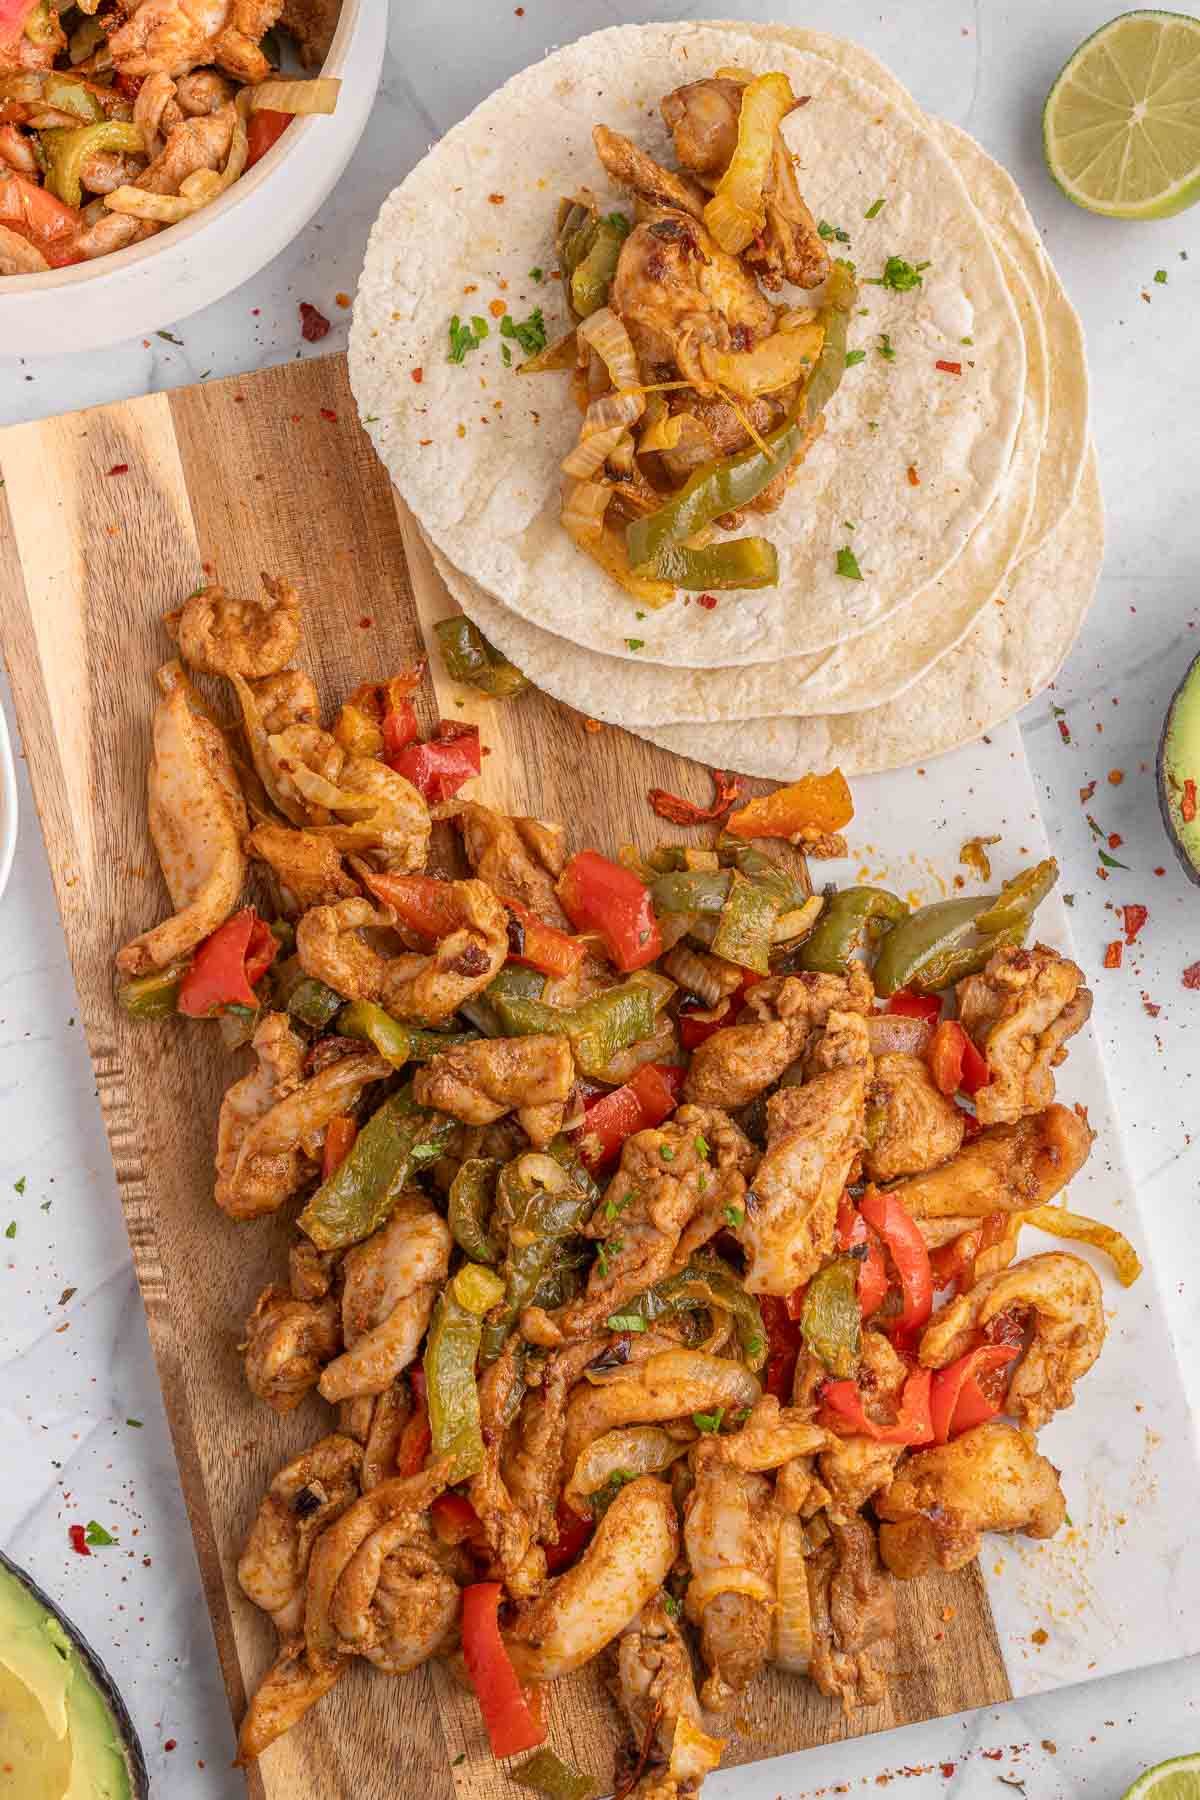 Chicken fajitas on a cutting board with salsa and tortillas.